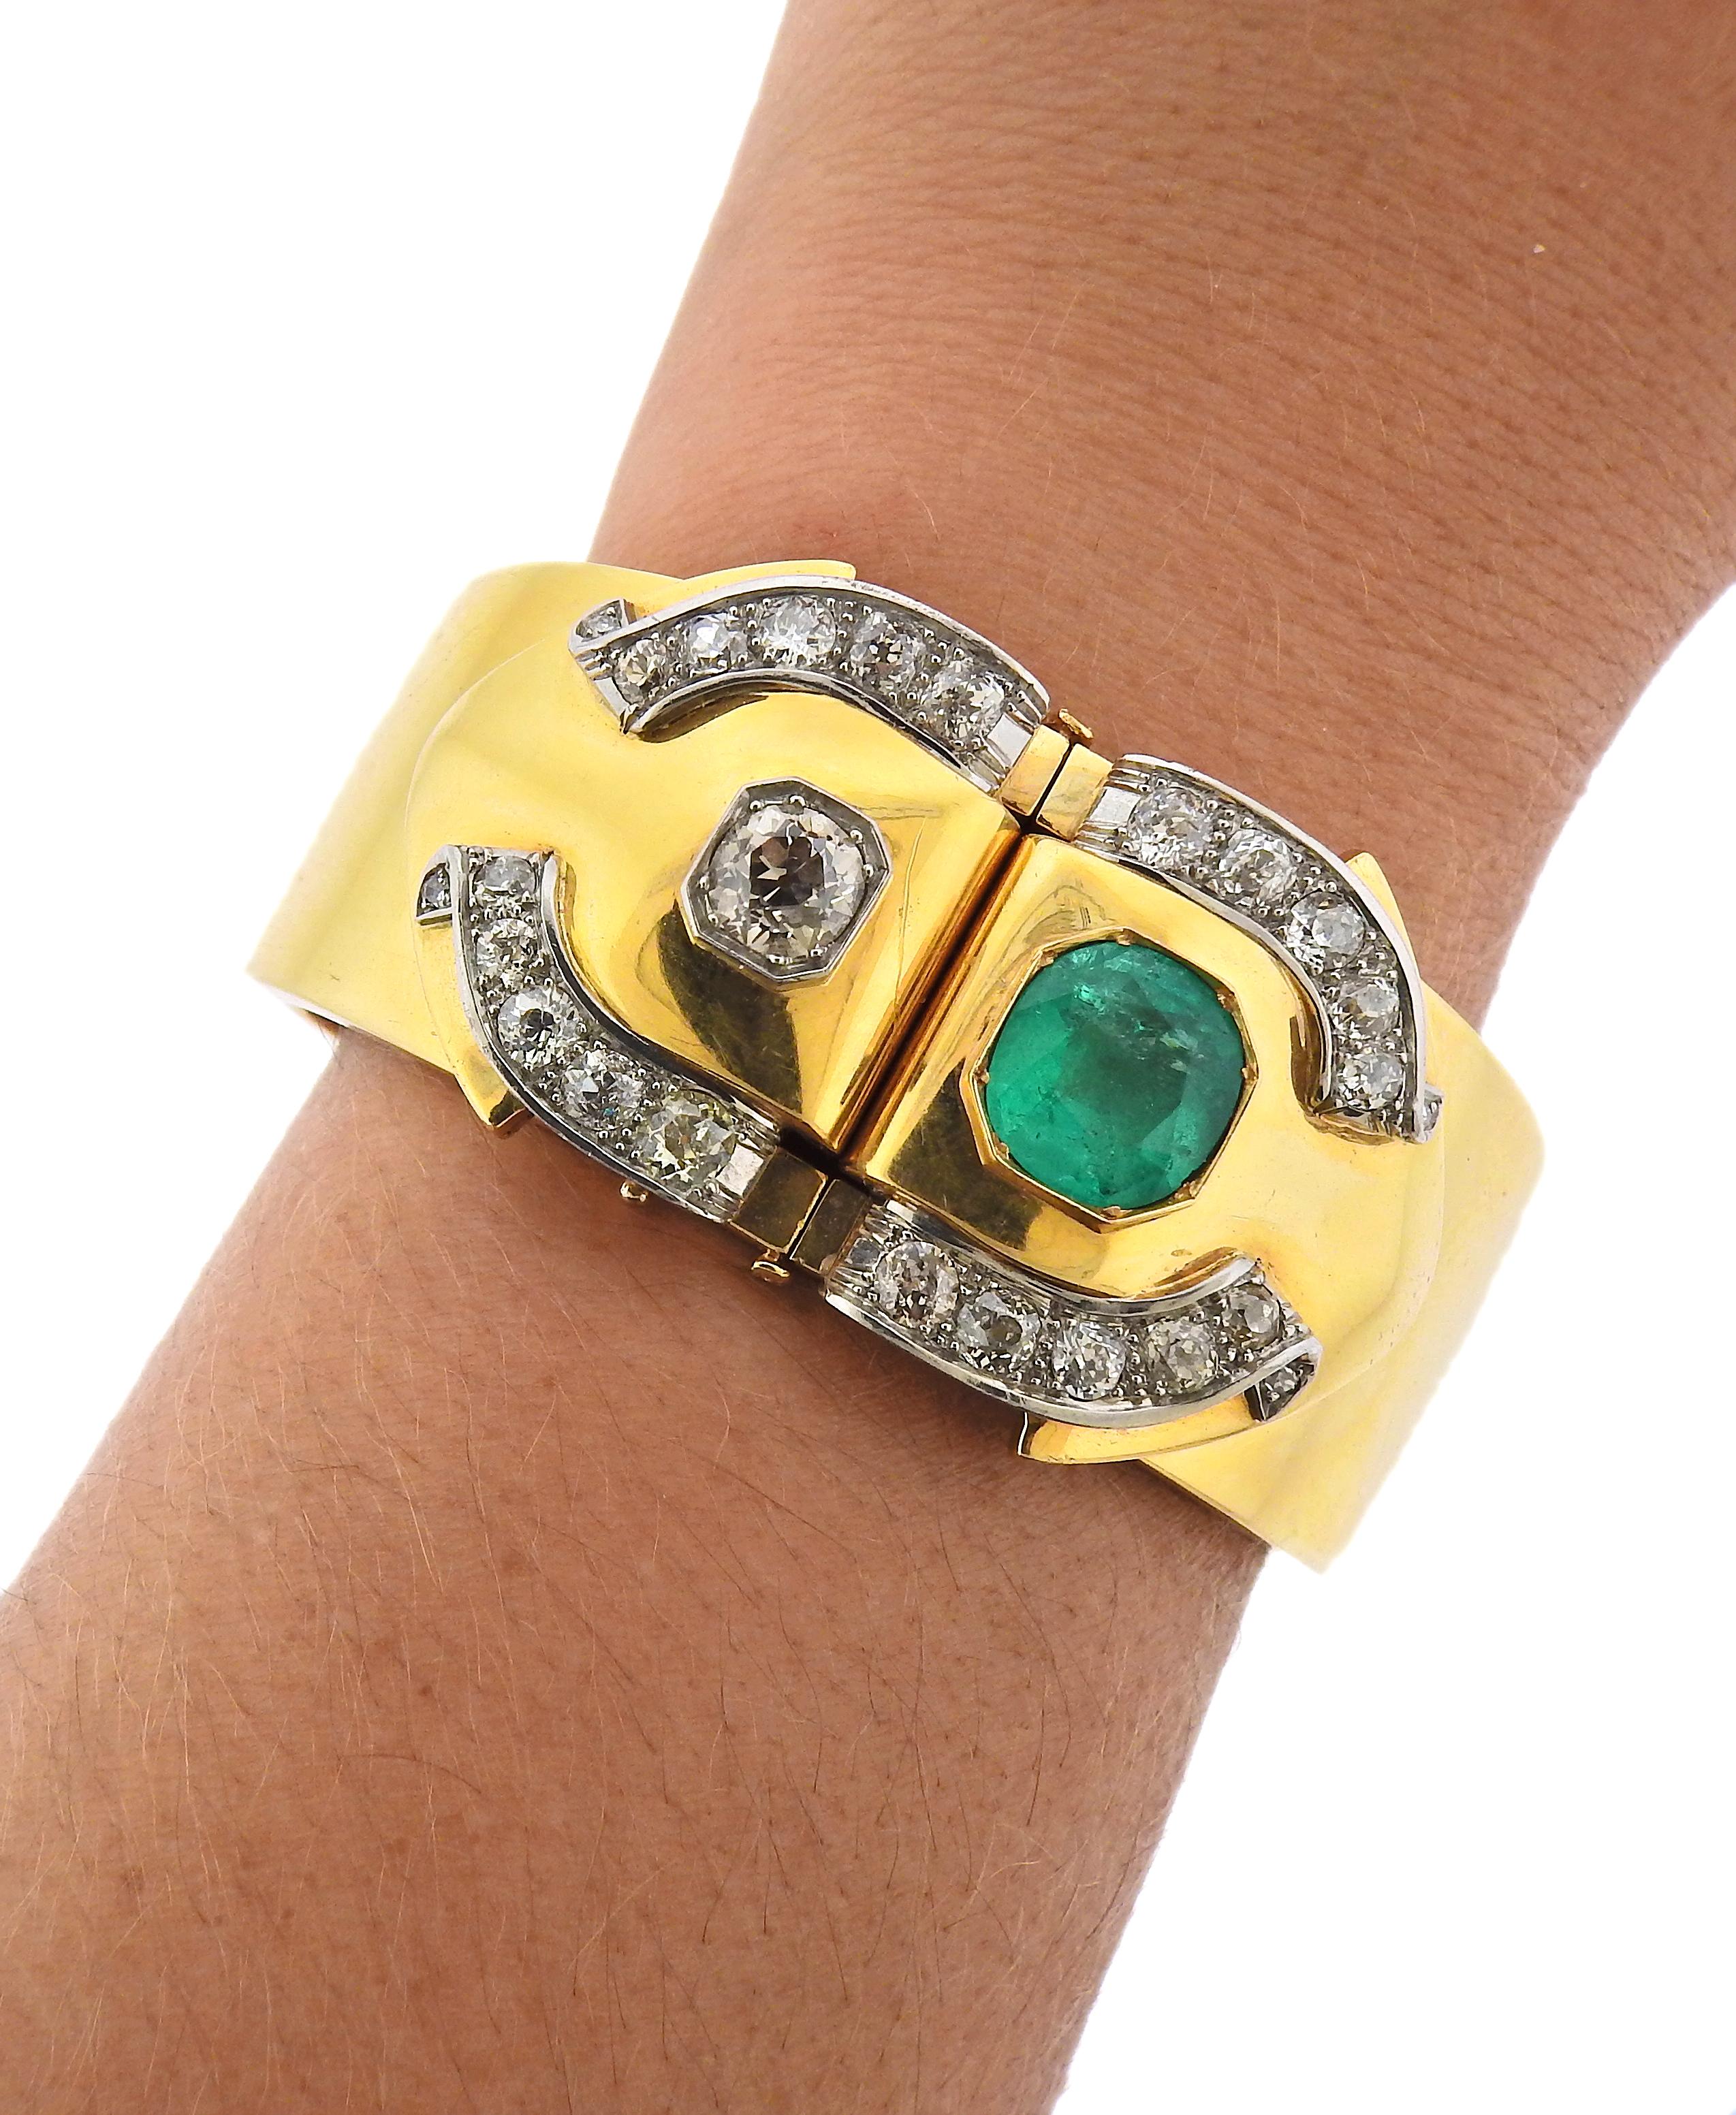 Antique Emerald Diamond Gold Bangle Bracelet In Excellent Condition For Sale In New York, NY